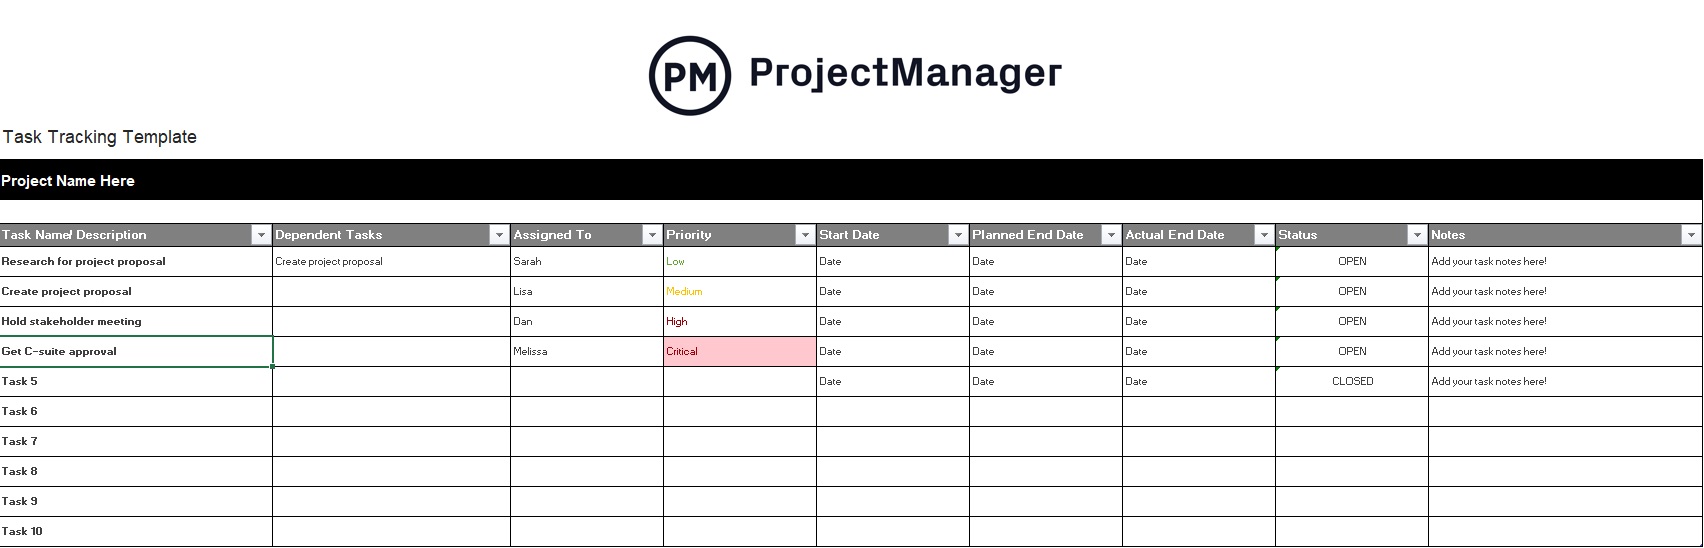 ProjectManager's task tracking template for Google Sheets